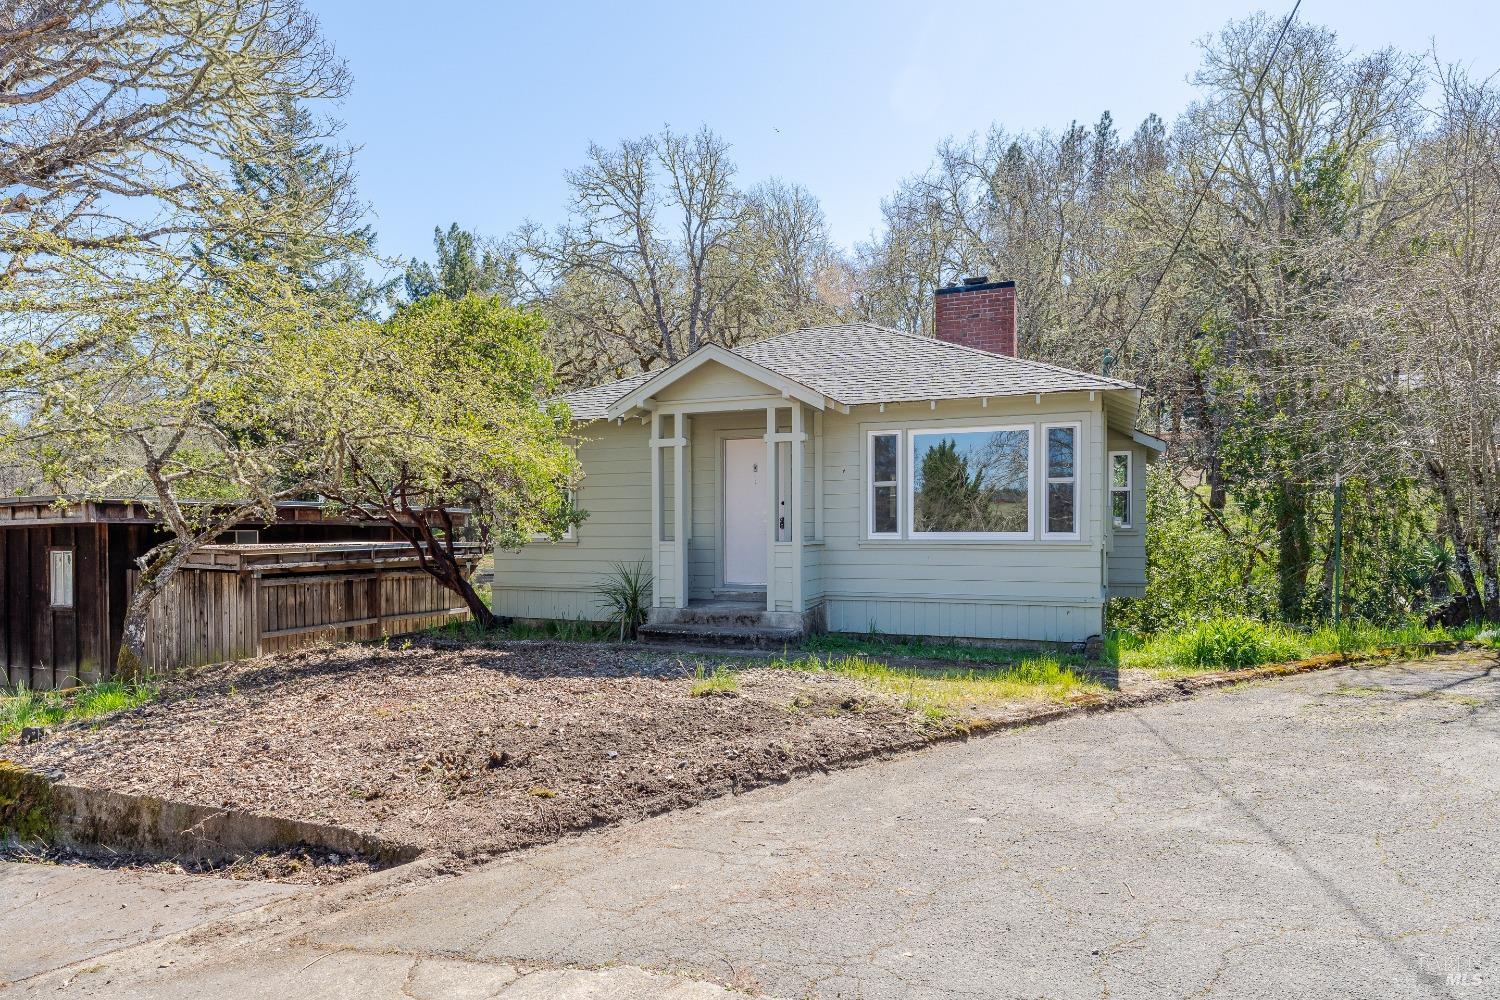 Photo of 565 Redwood Ave in Willits, CA